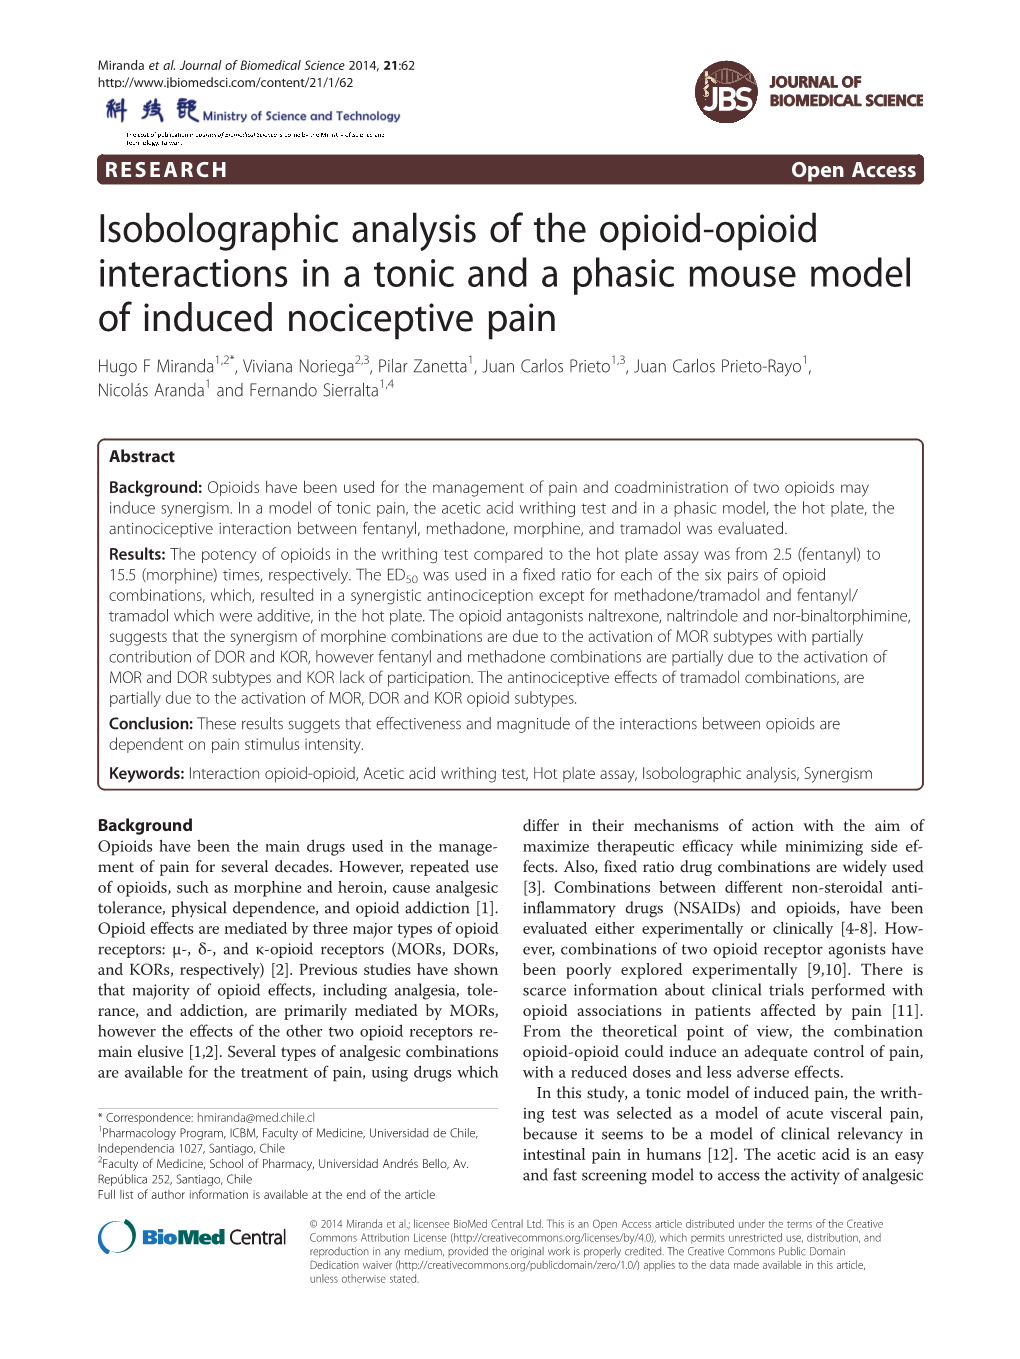 Isobolographic Analysis of the Opioid-Opioid Interactions in a Tonic and a Phasic Mouse Model of Induced Nociceptive Pain